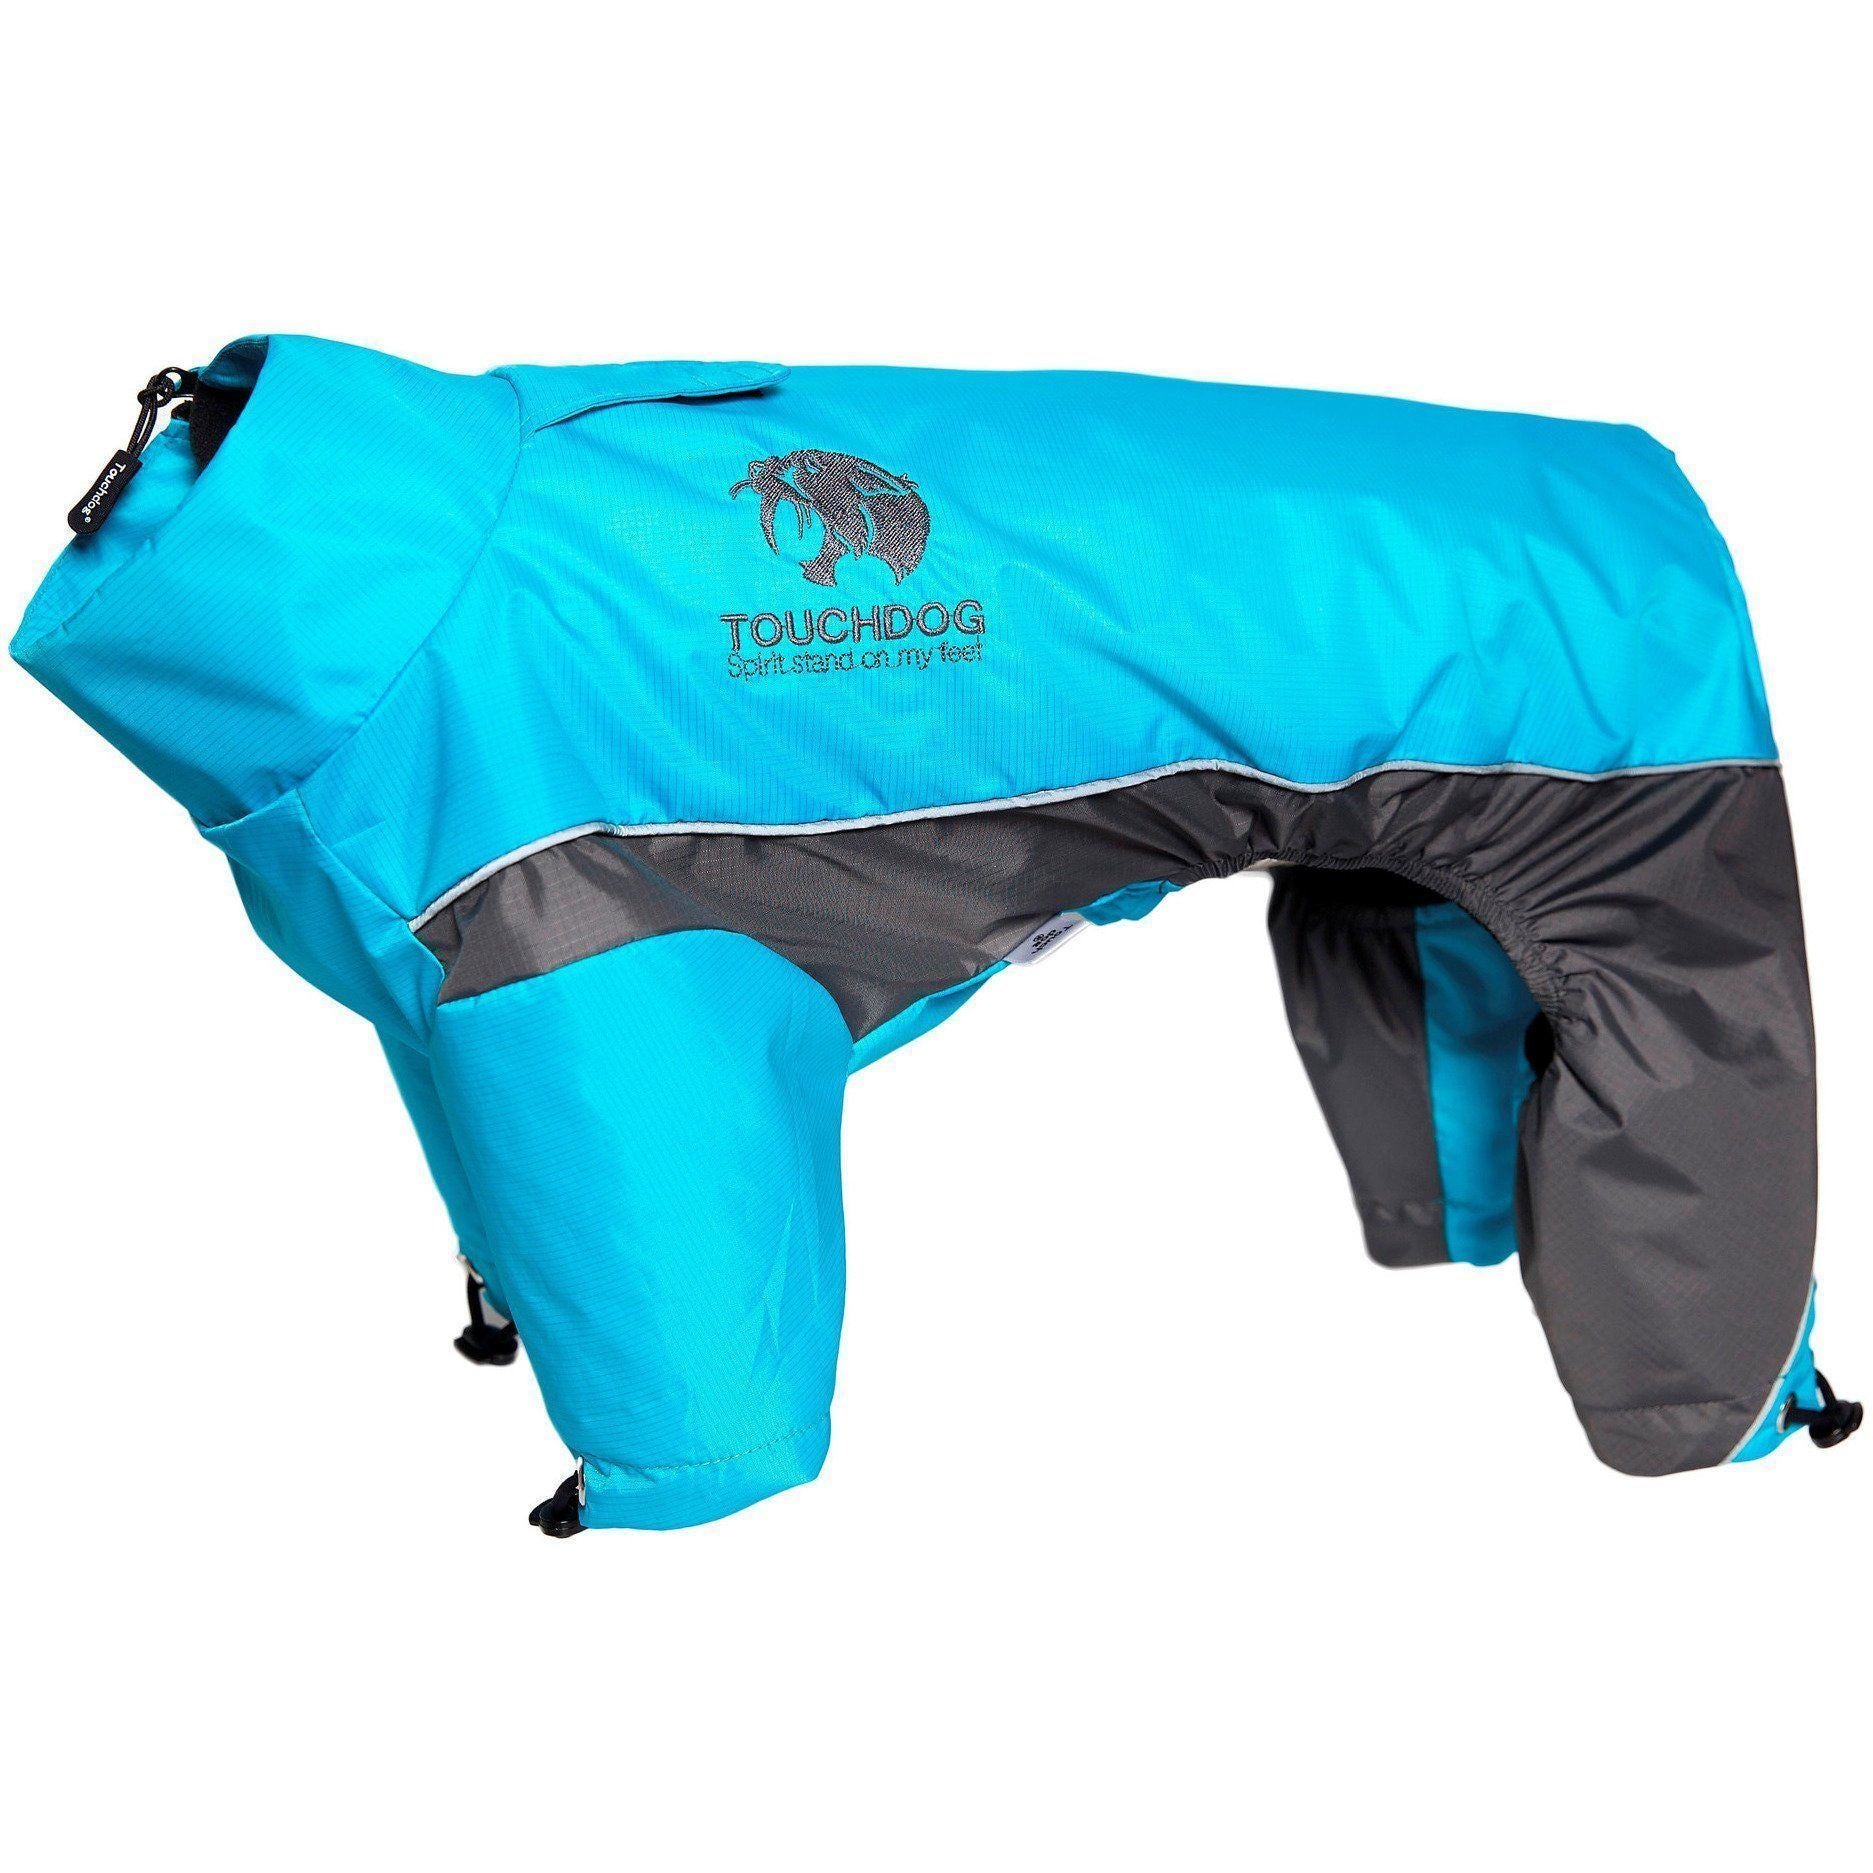 Touchdog ® Quantum-Ice Adjustable and Reflective Full-Body Winter Dog Jacket X-Small Ocean Blue, Grey